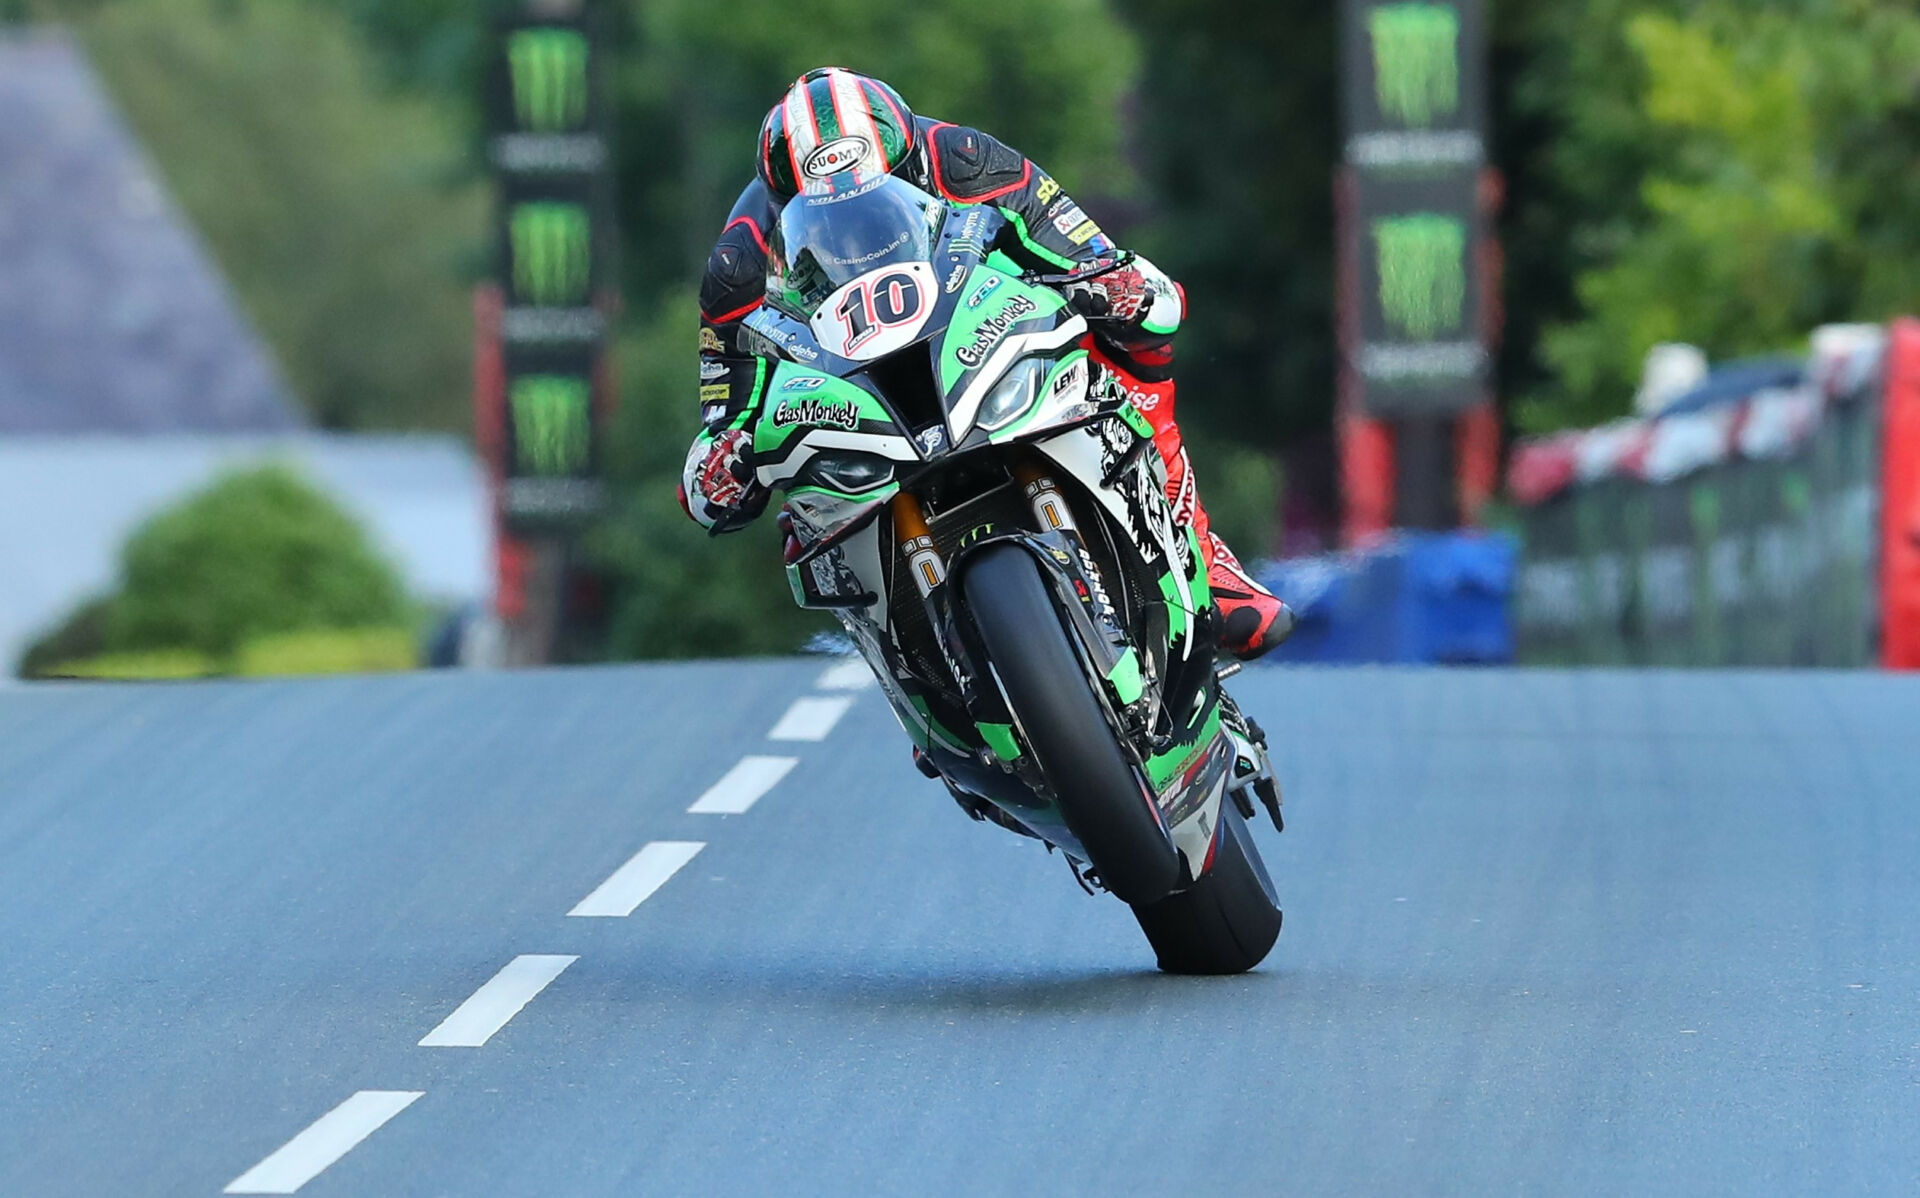 Documentary On 2022 Isle Of Man TT Comes Out Nov. 23 (Includes Video